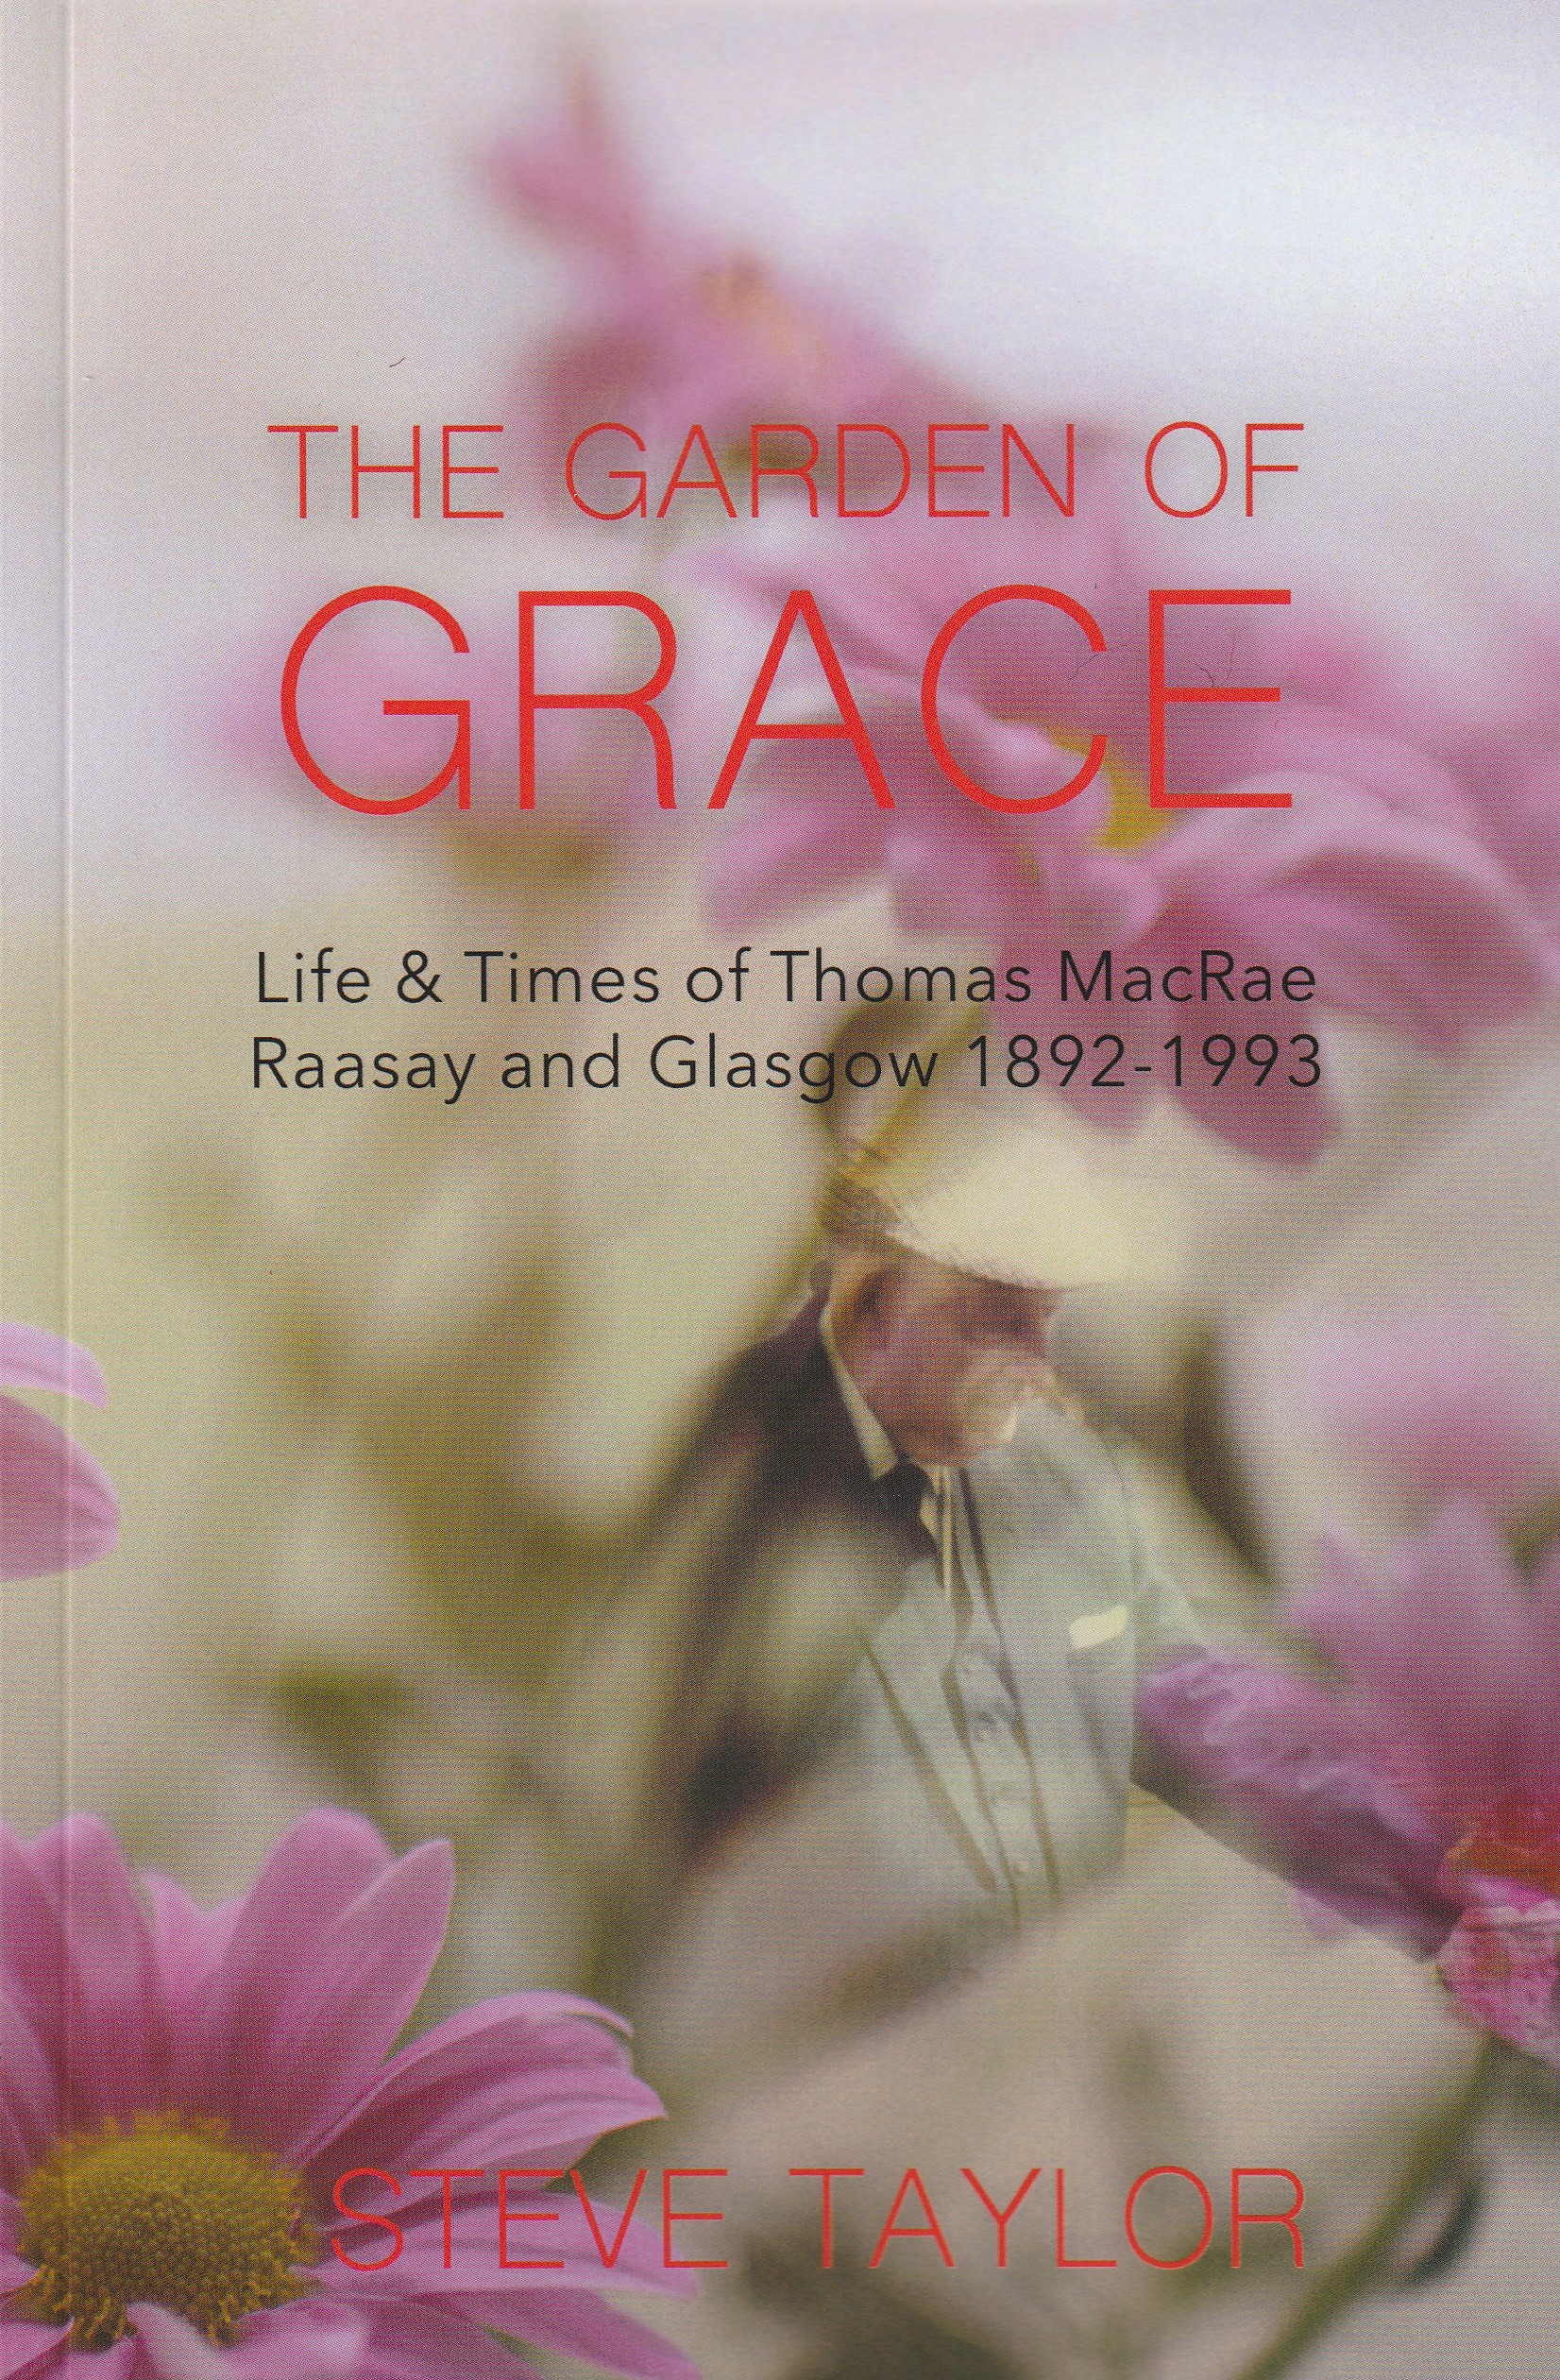 The Garden of Grace: Life & Times of Thomas MacRae, Raasay and Glasgow